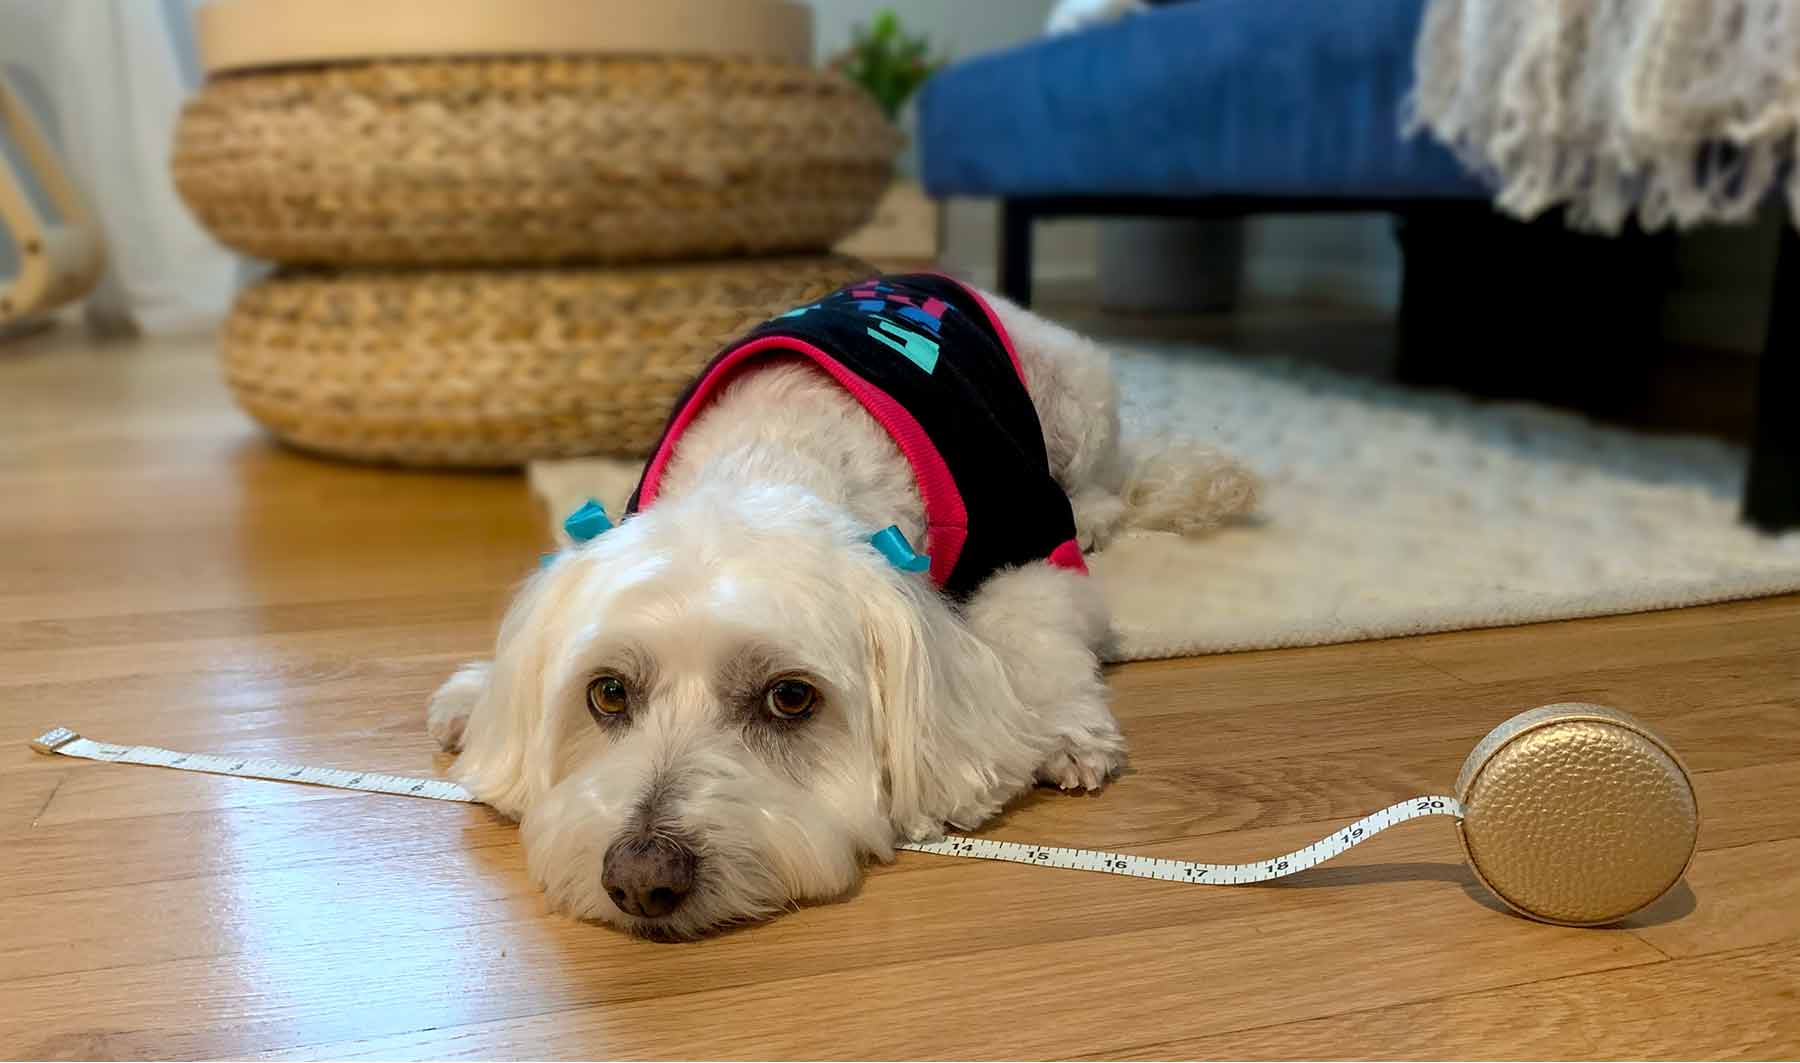 Willow, Bichon Frise, Maltese and Havanese mix teaches the best way to know your dog's costume size by taking your dog's measurements.